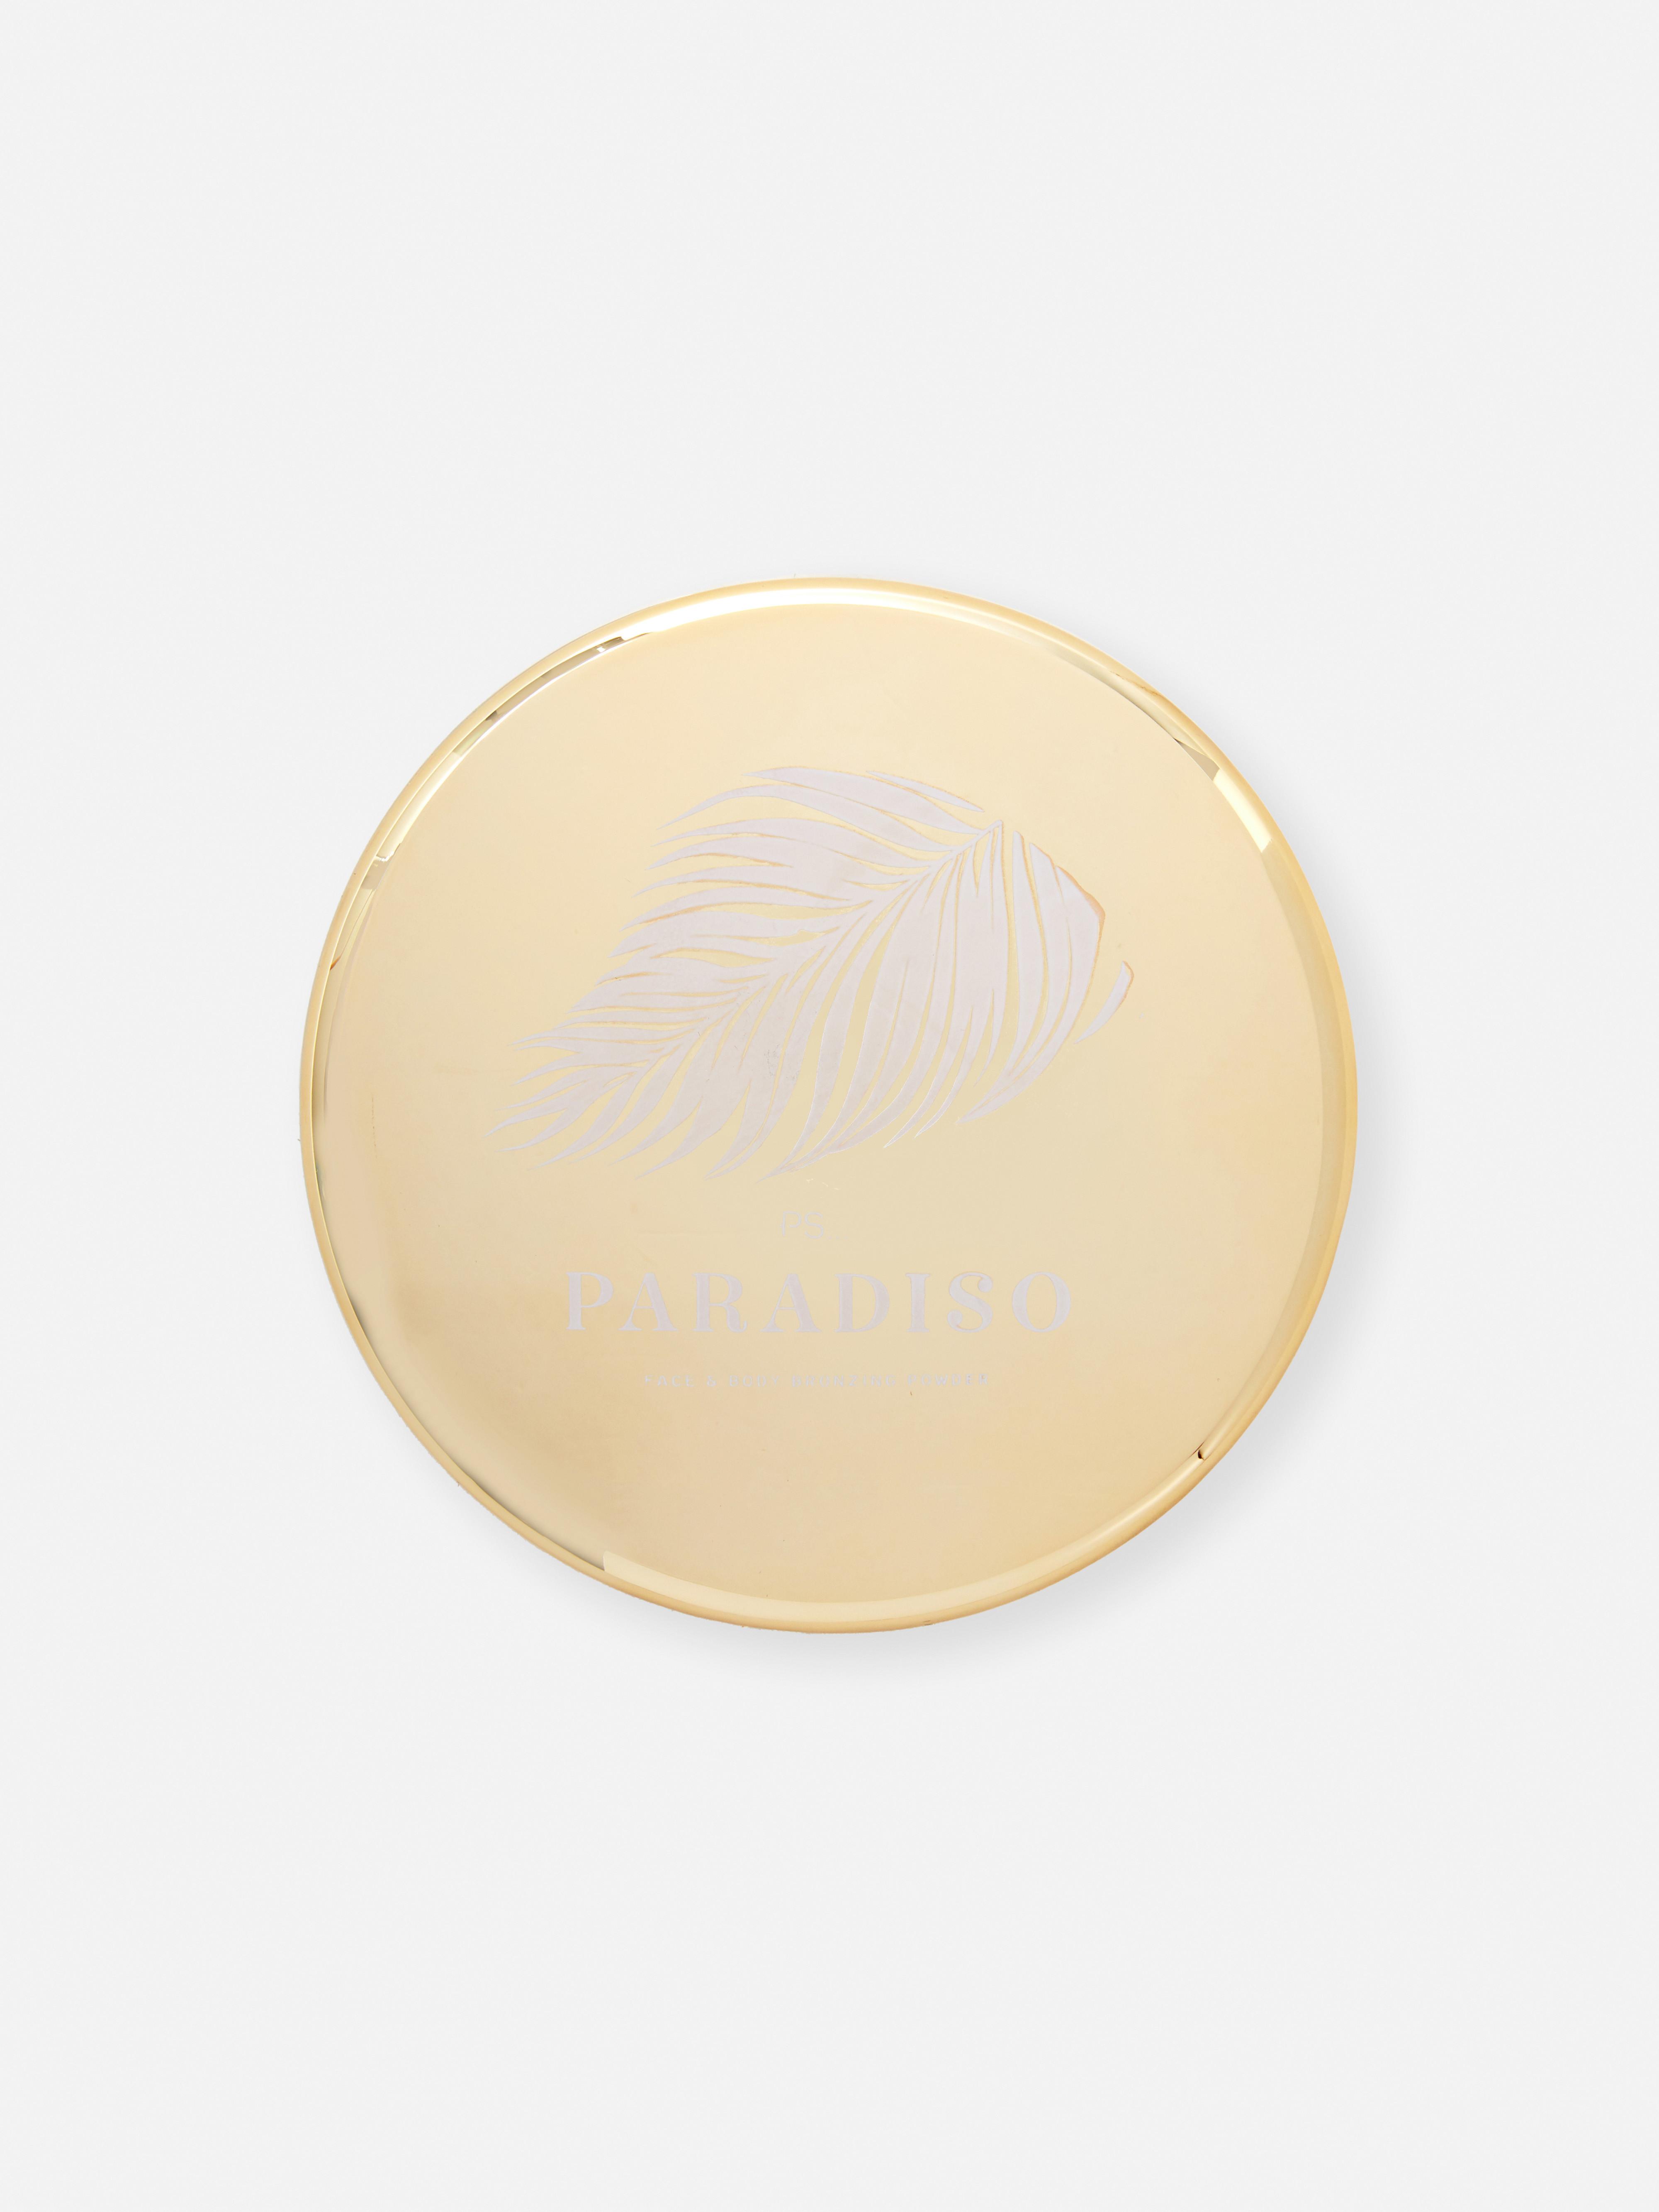 Paradiso Face and Body Bronzer Powder